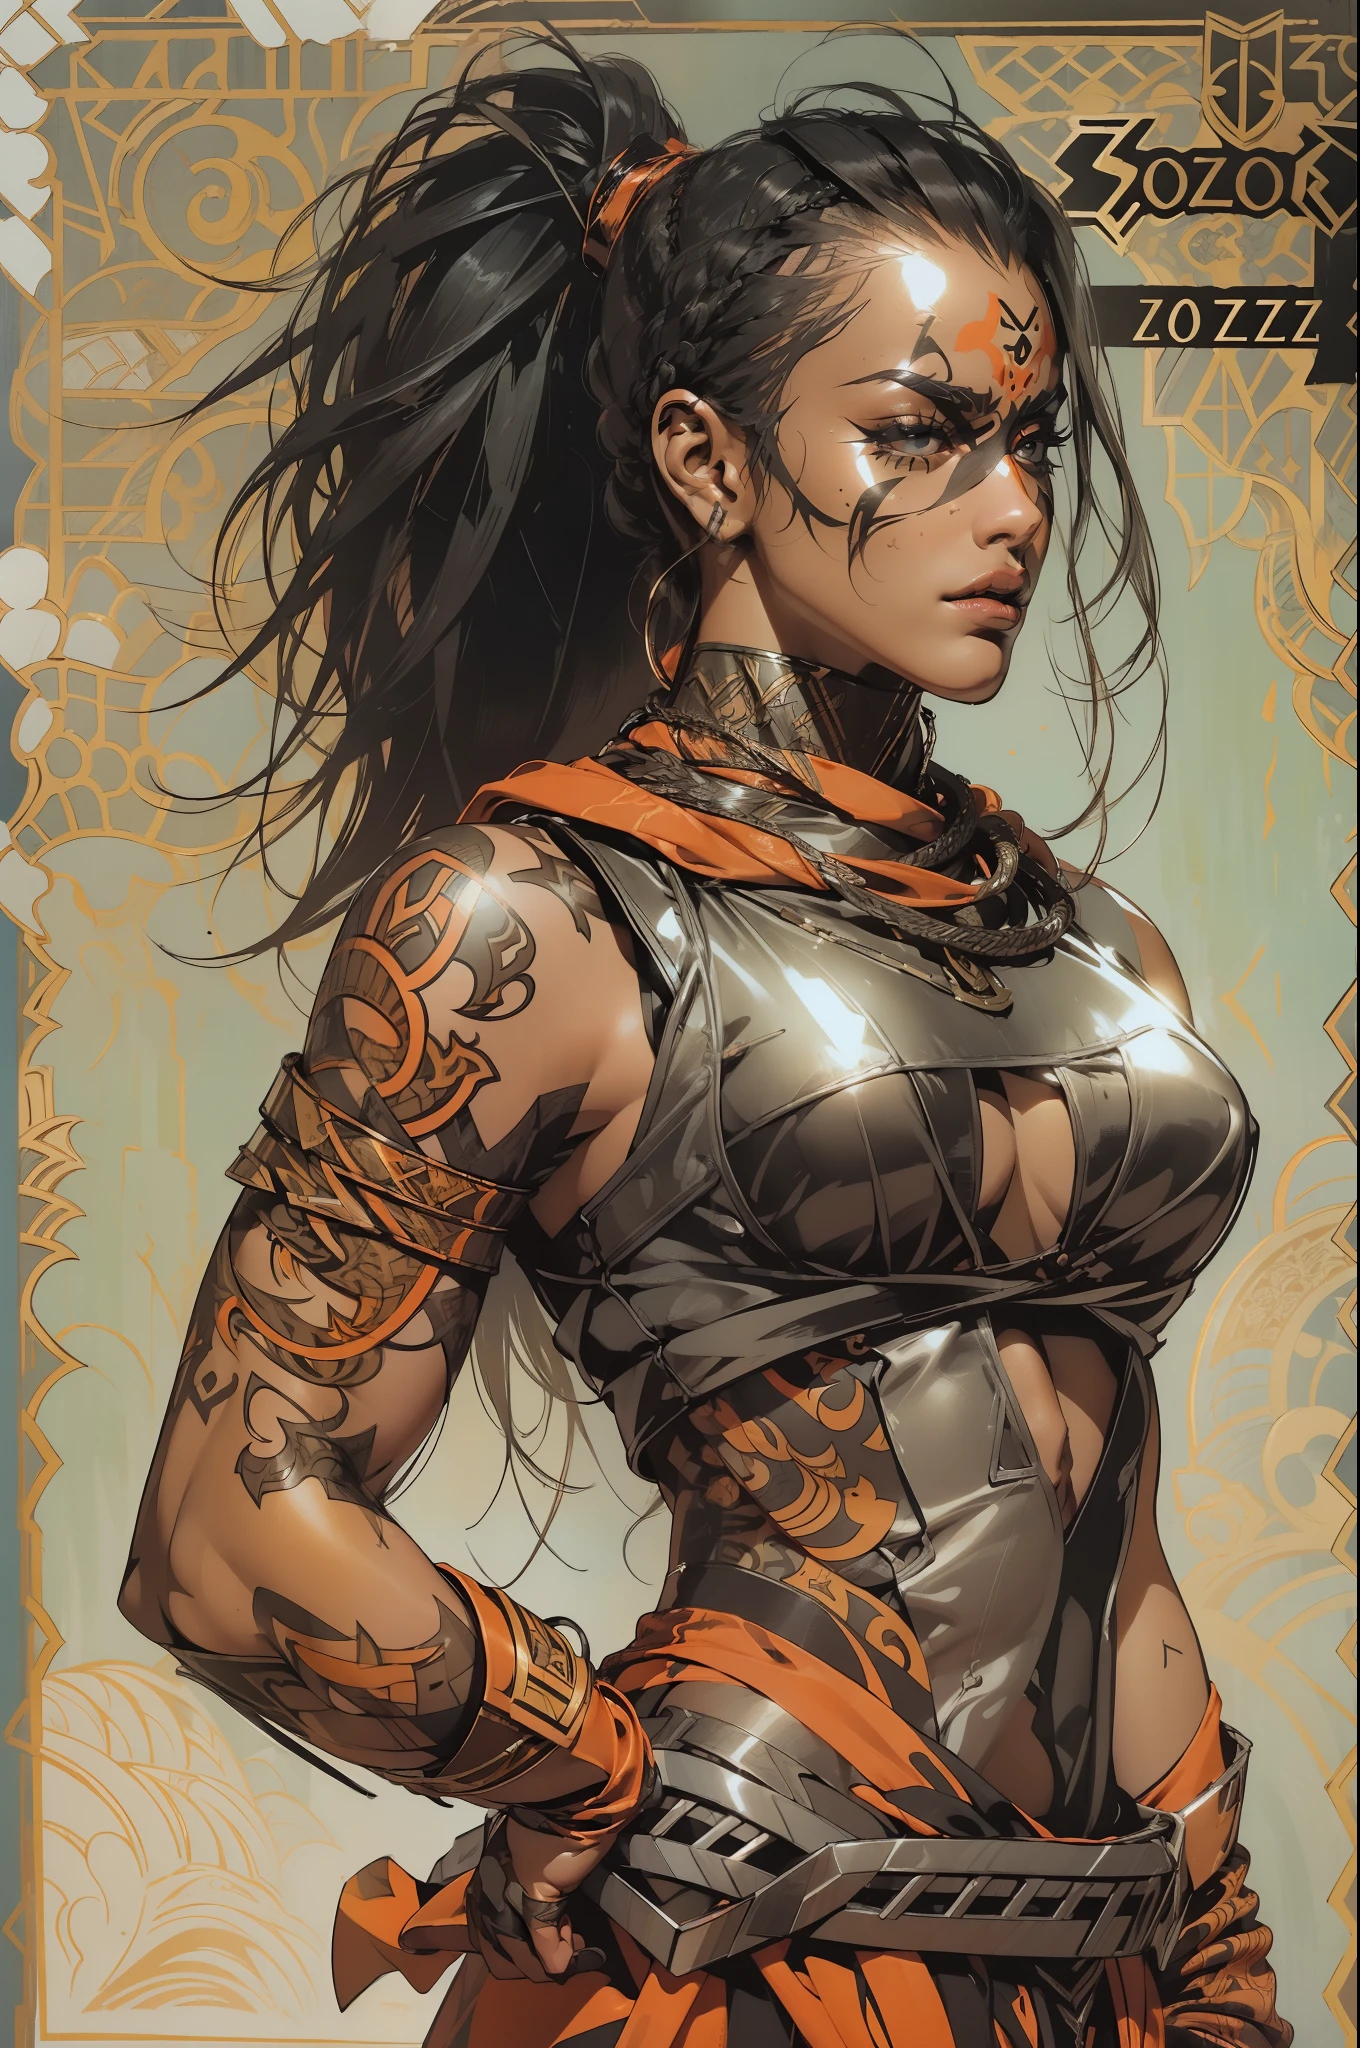 (((Woman))), (((best qualityer))), (((​masterpiece))), (((grown-up))), orange, A 30-year-old gladiator woman with an athletic body, (((standing alone))), (((1girl))) , Brooklyn Gladiators, almost naked in Simon Bisley&#39;s wild urban style for the cover of Heavy Metal magazine, black hair with ponytail, Minimum clothing, pattern with orange and black katakanas, armour, full of spikes and rivets, Yakuza tattoo, (((from the knee up))), bob haircut black hair